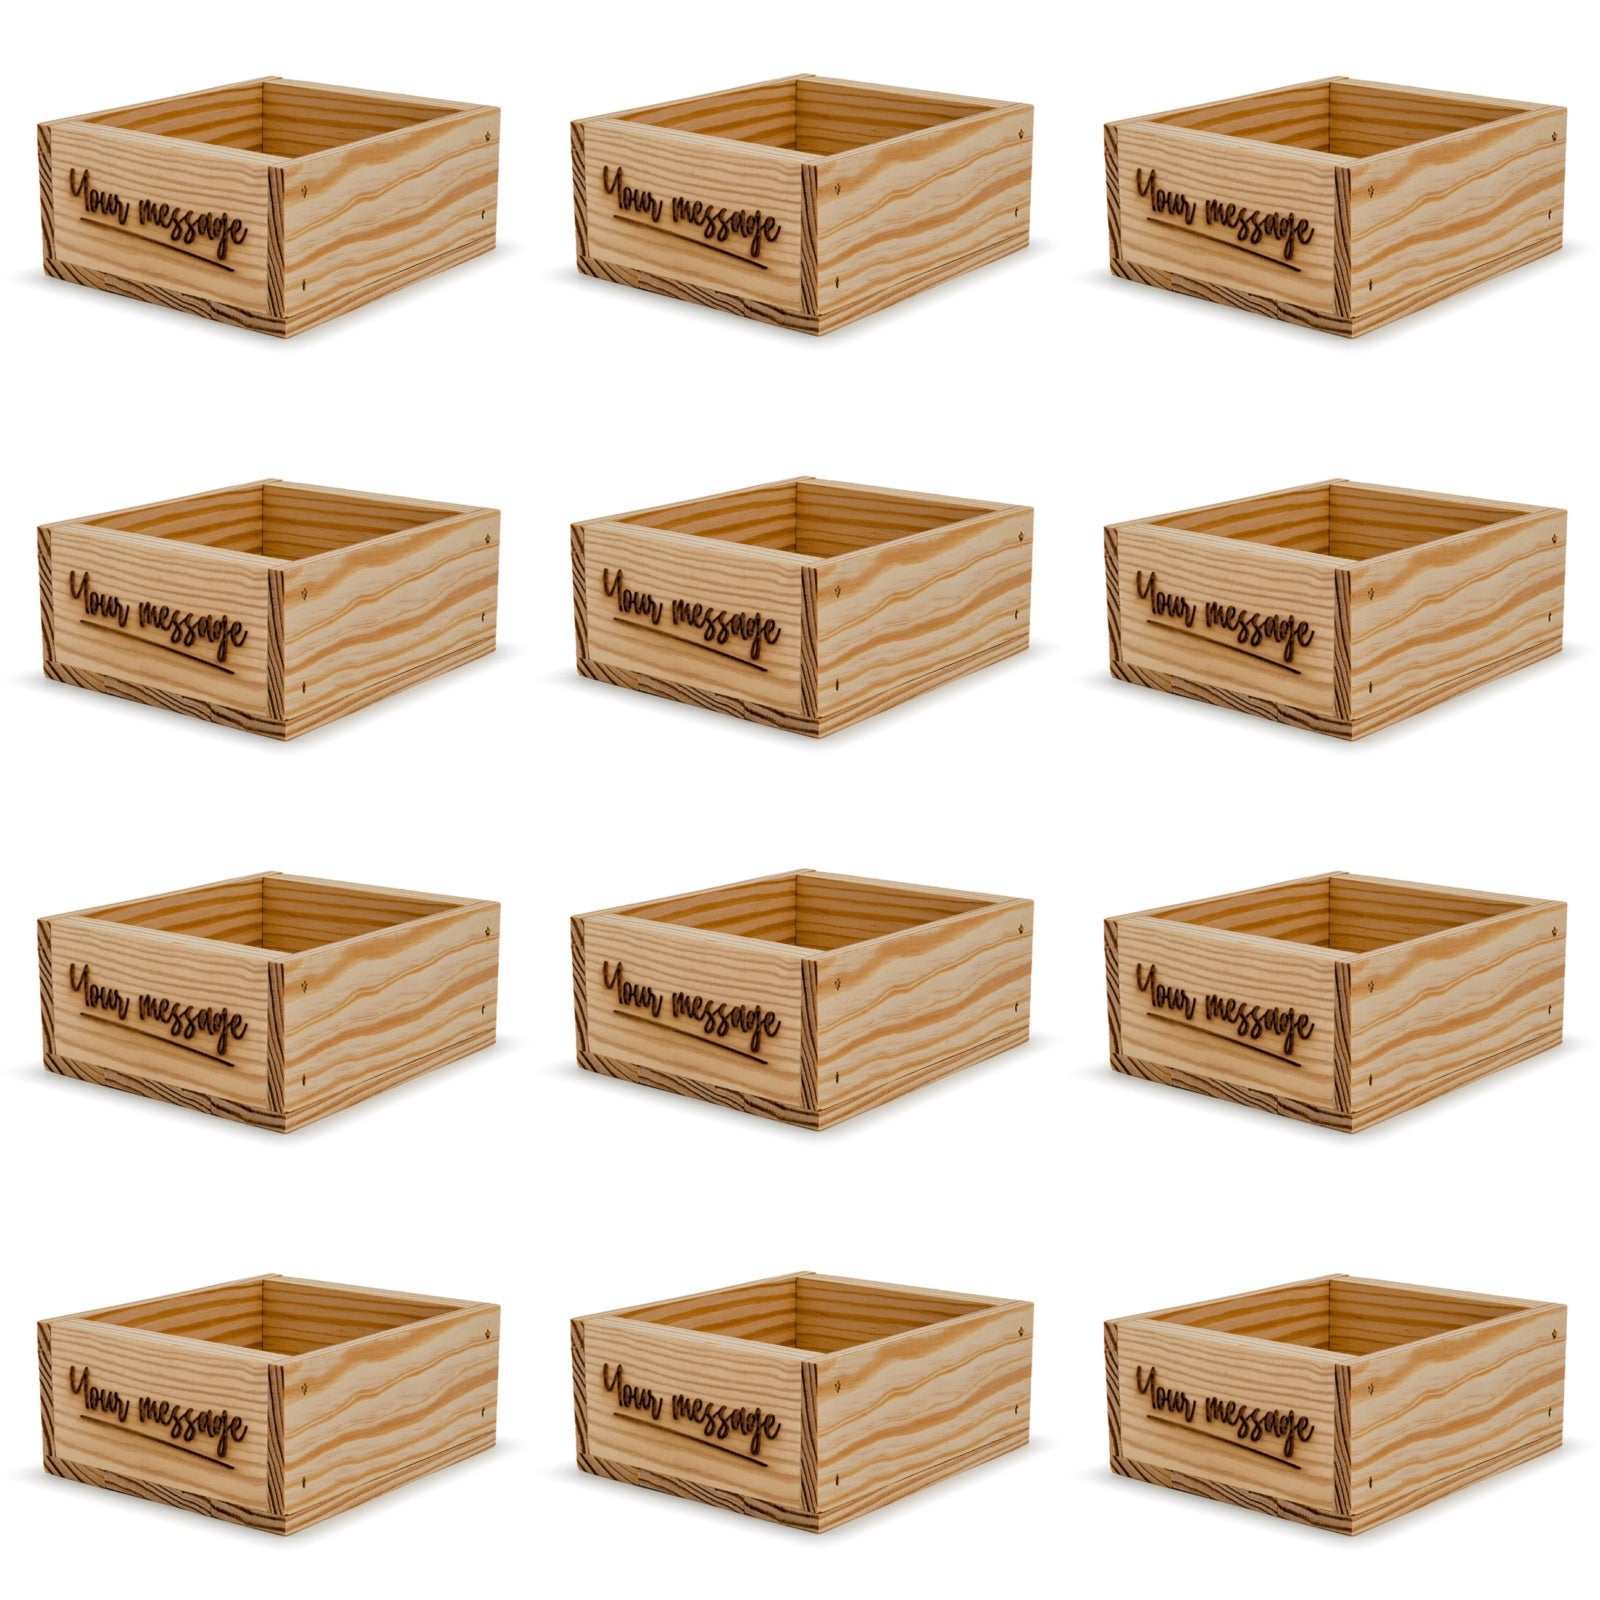 12 Small wooden crates with custom message 6x5.5x2.75